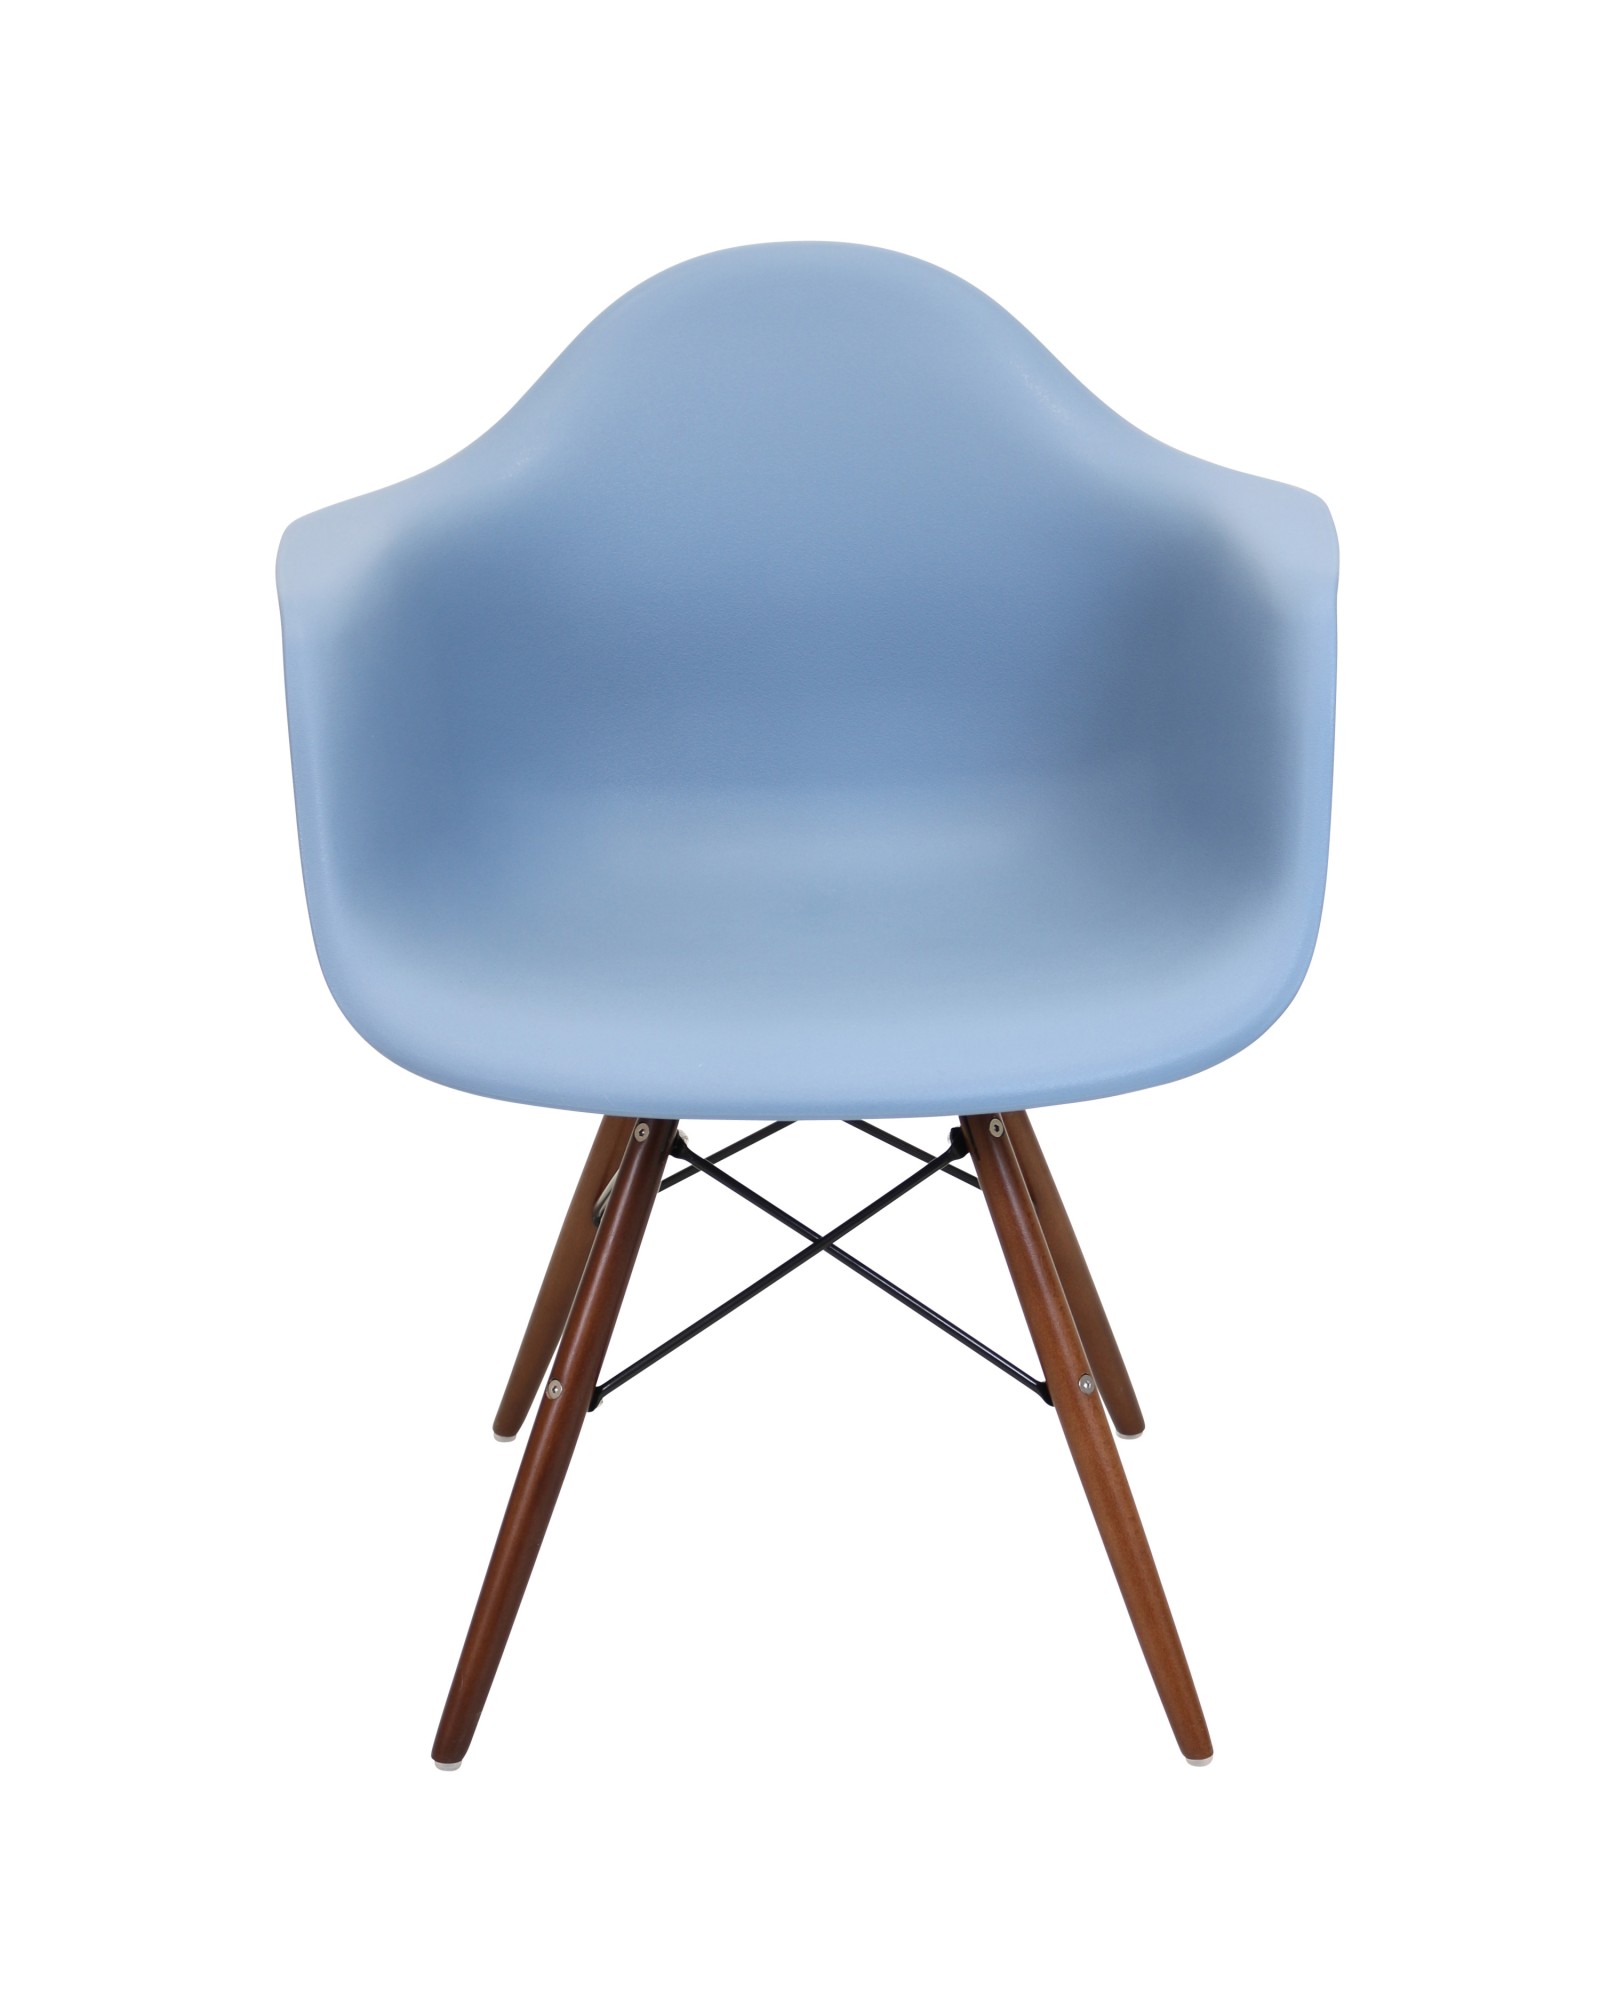 Neo Flair Mid-Century Modern Chair in Bleu Slate and Espresso - Set of 2